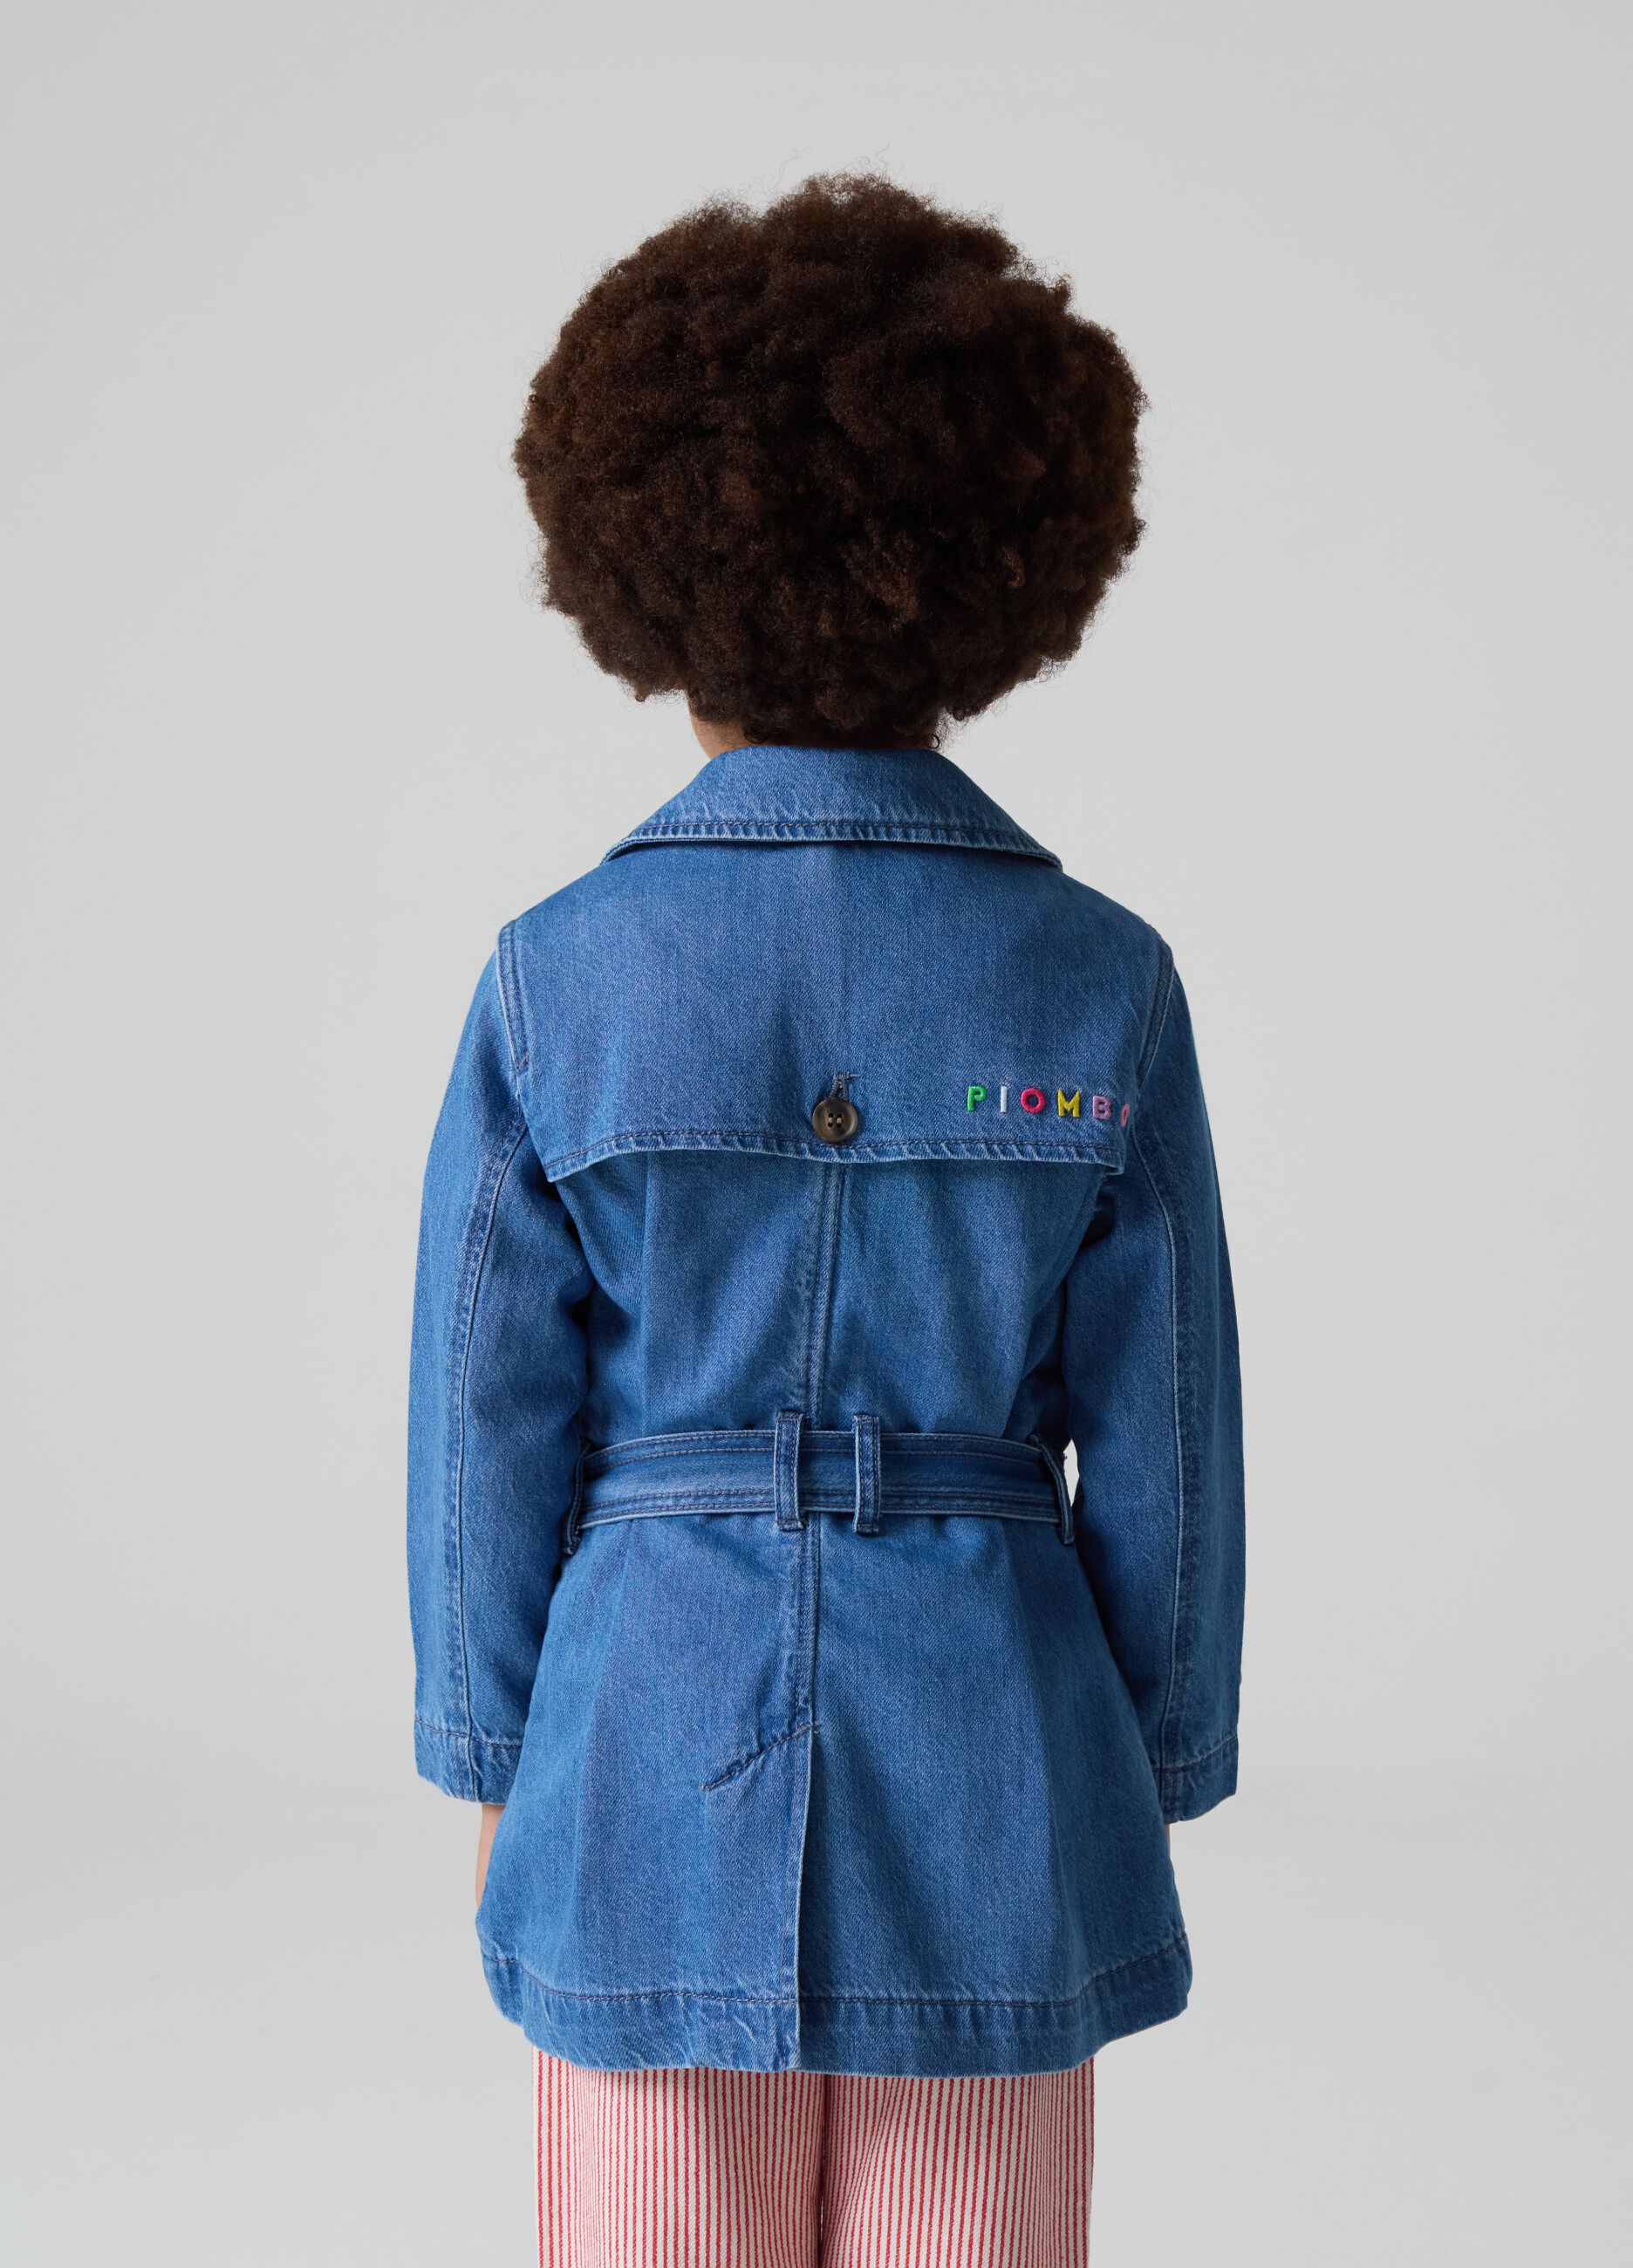 Denim trench coat with logo embroidery